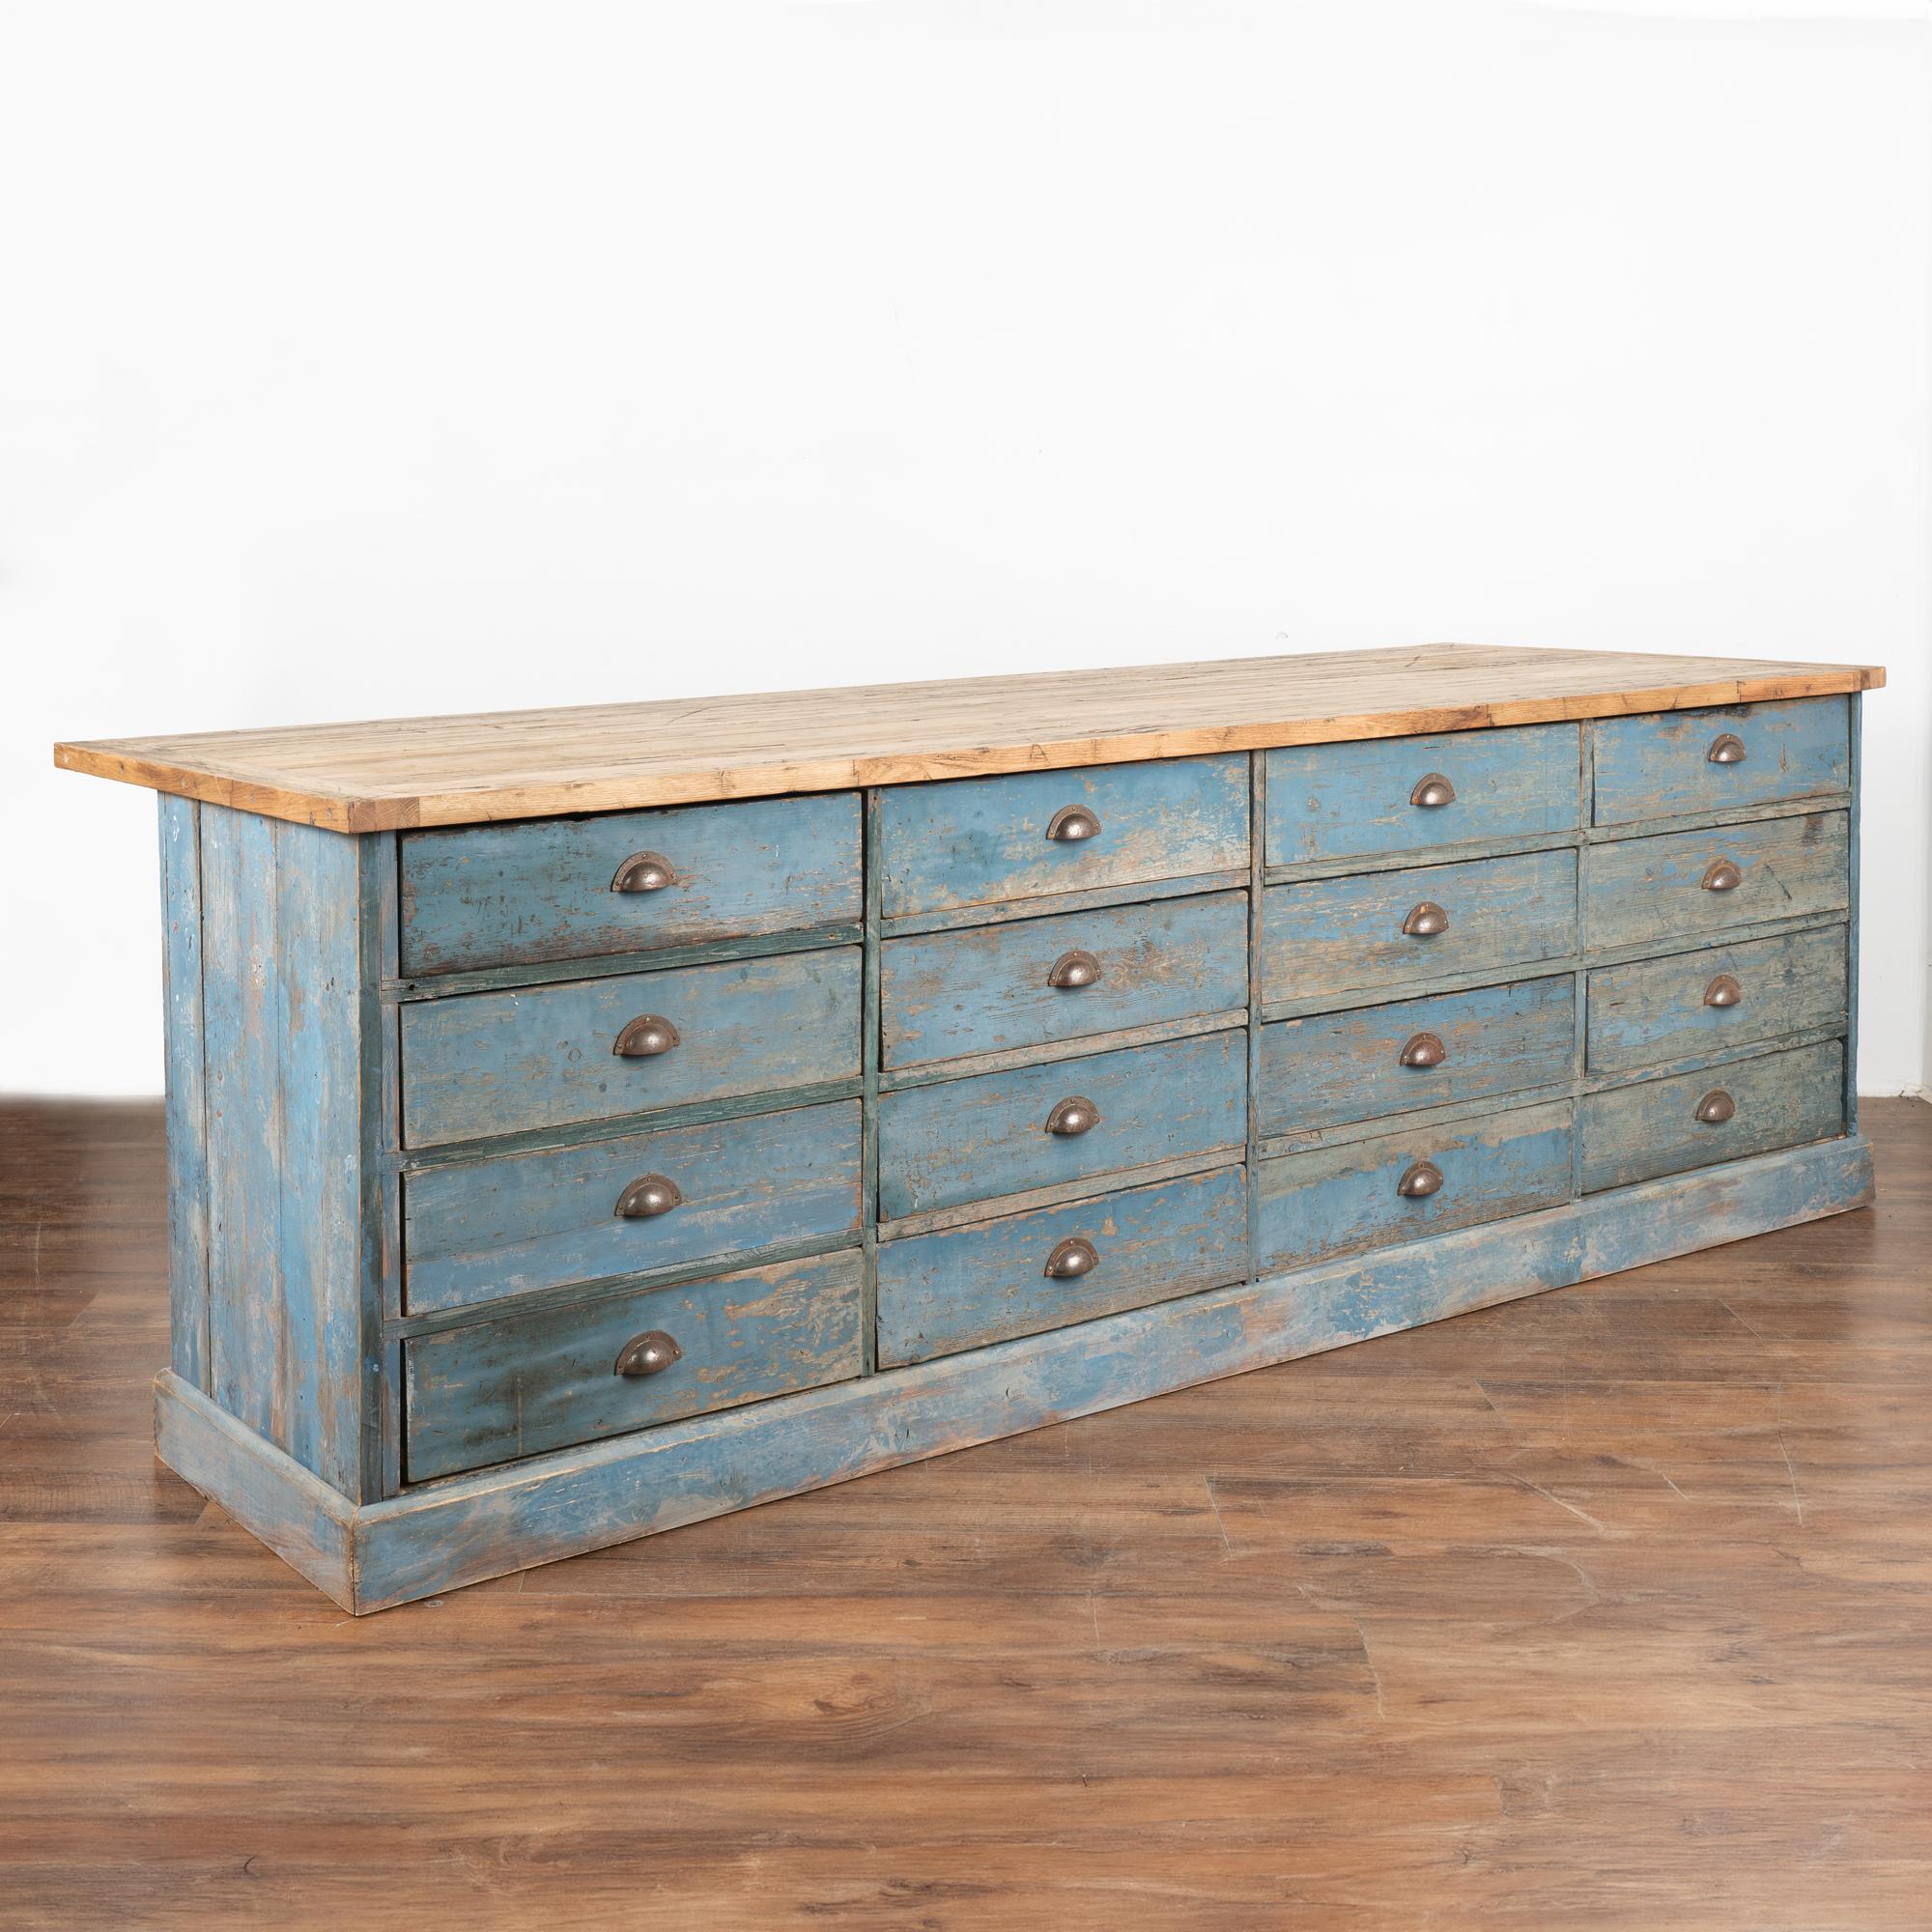 Large Blue Painted Rustic Kitchen Island Shop Apothecary, Sweden circa 1890 5